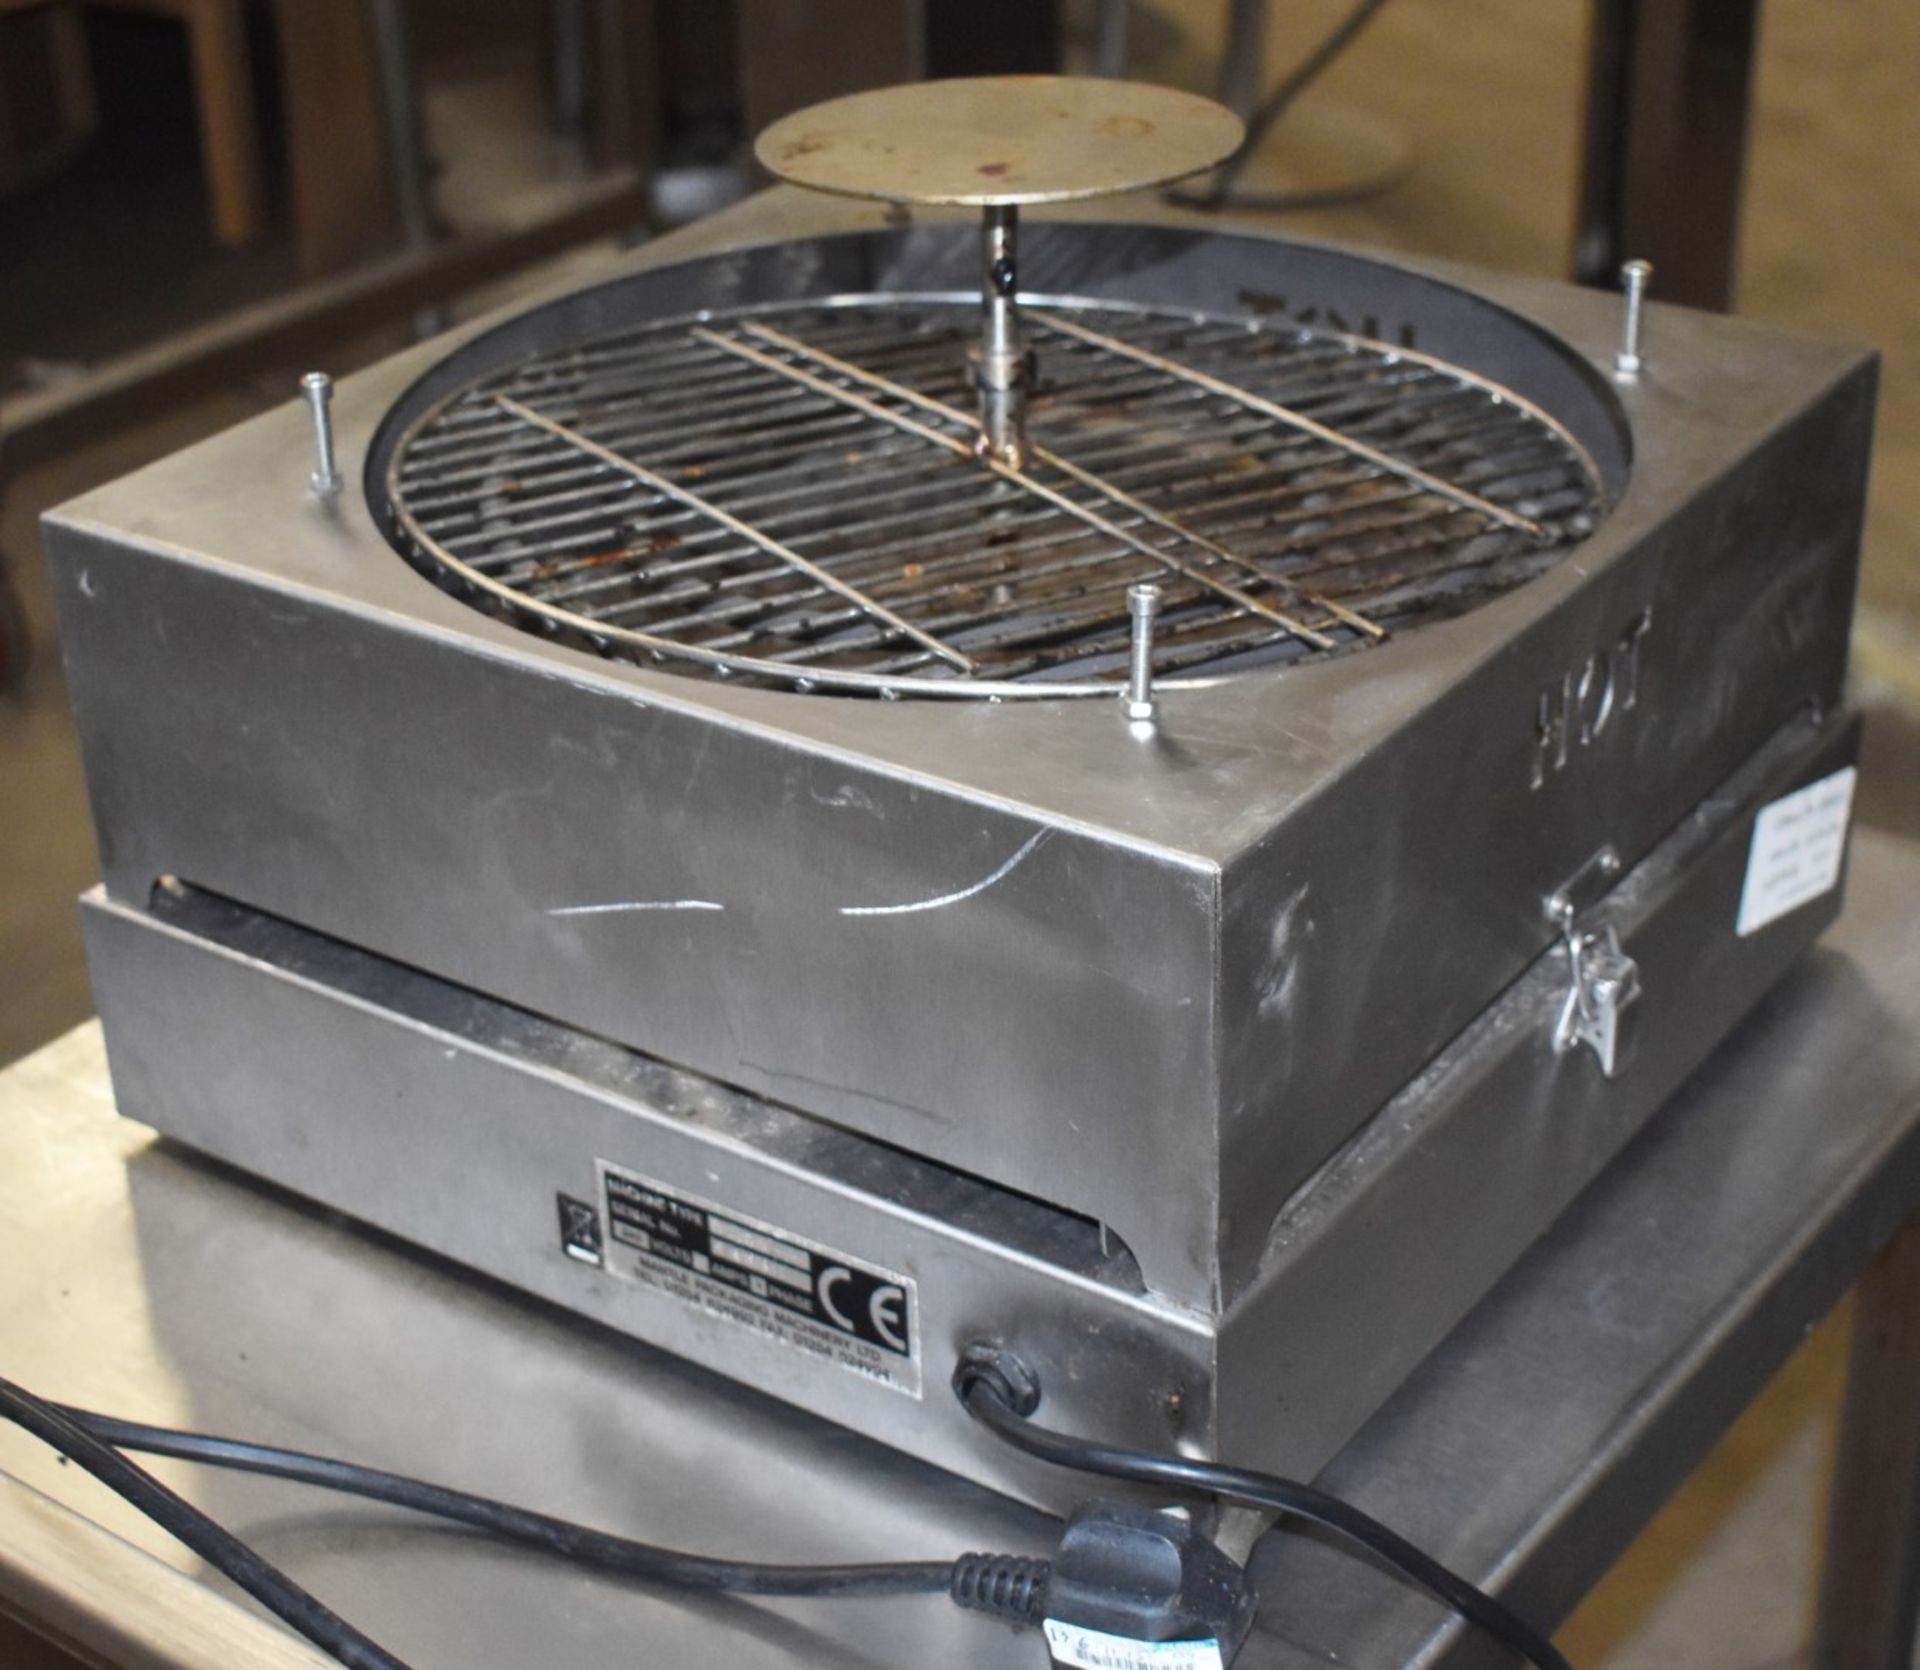 1 x Pizza Capper Shrink System by Mantle Packaging - Model PC2000 - Stainless Steel Finish - 37.5 - Image 2 of 5